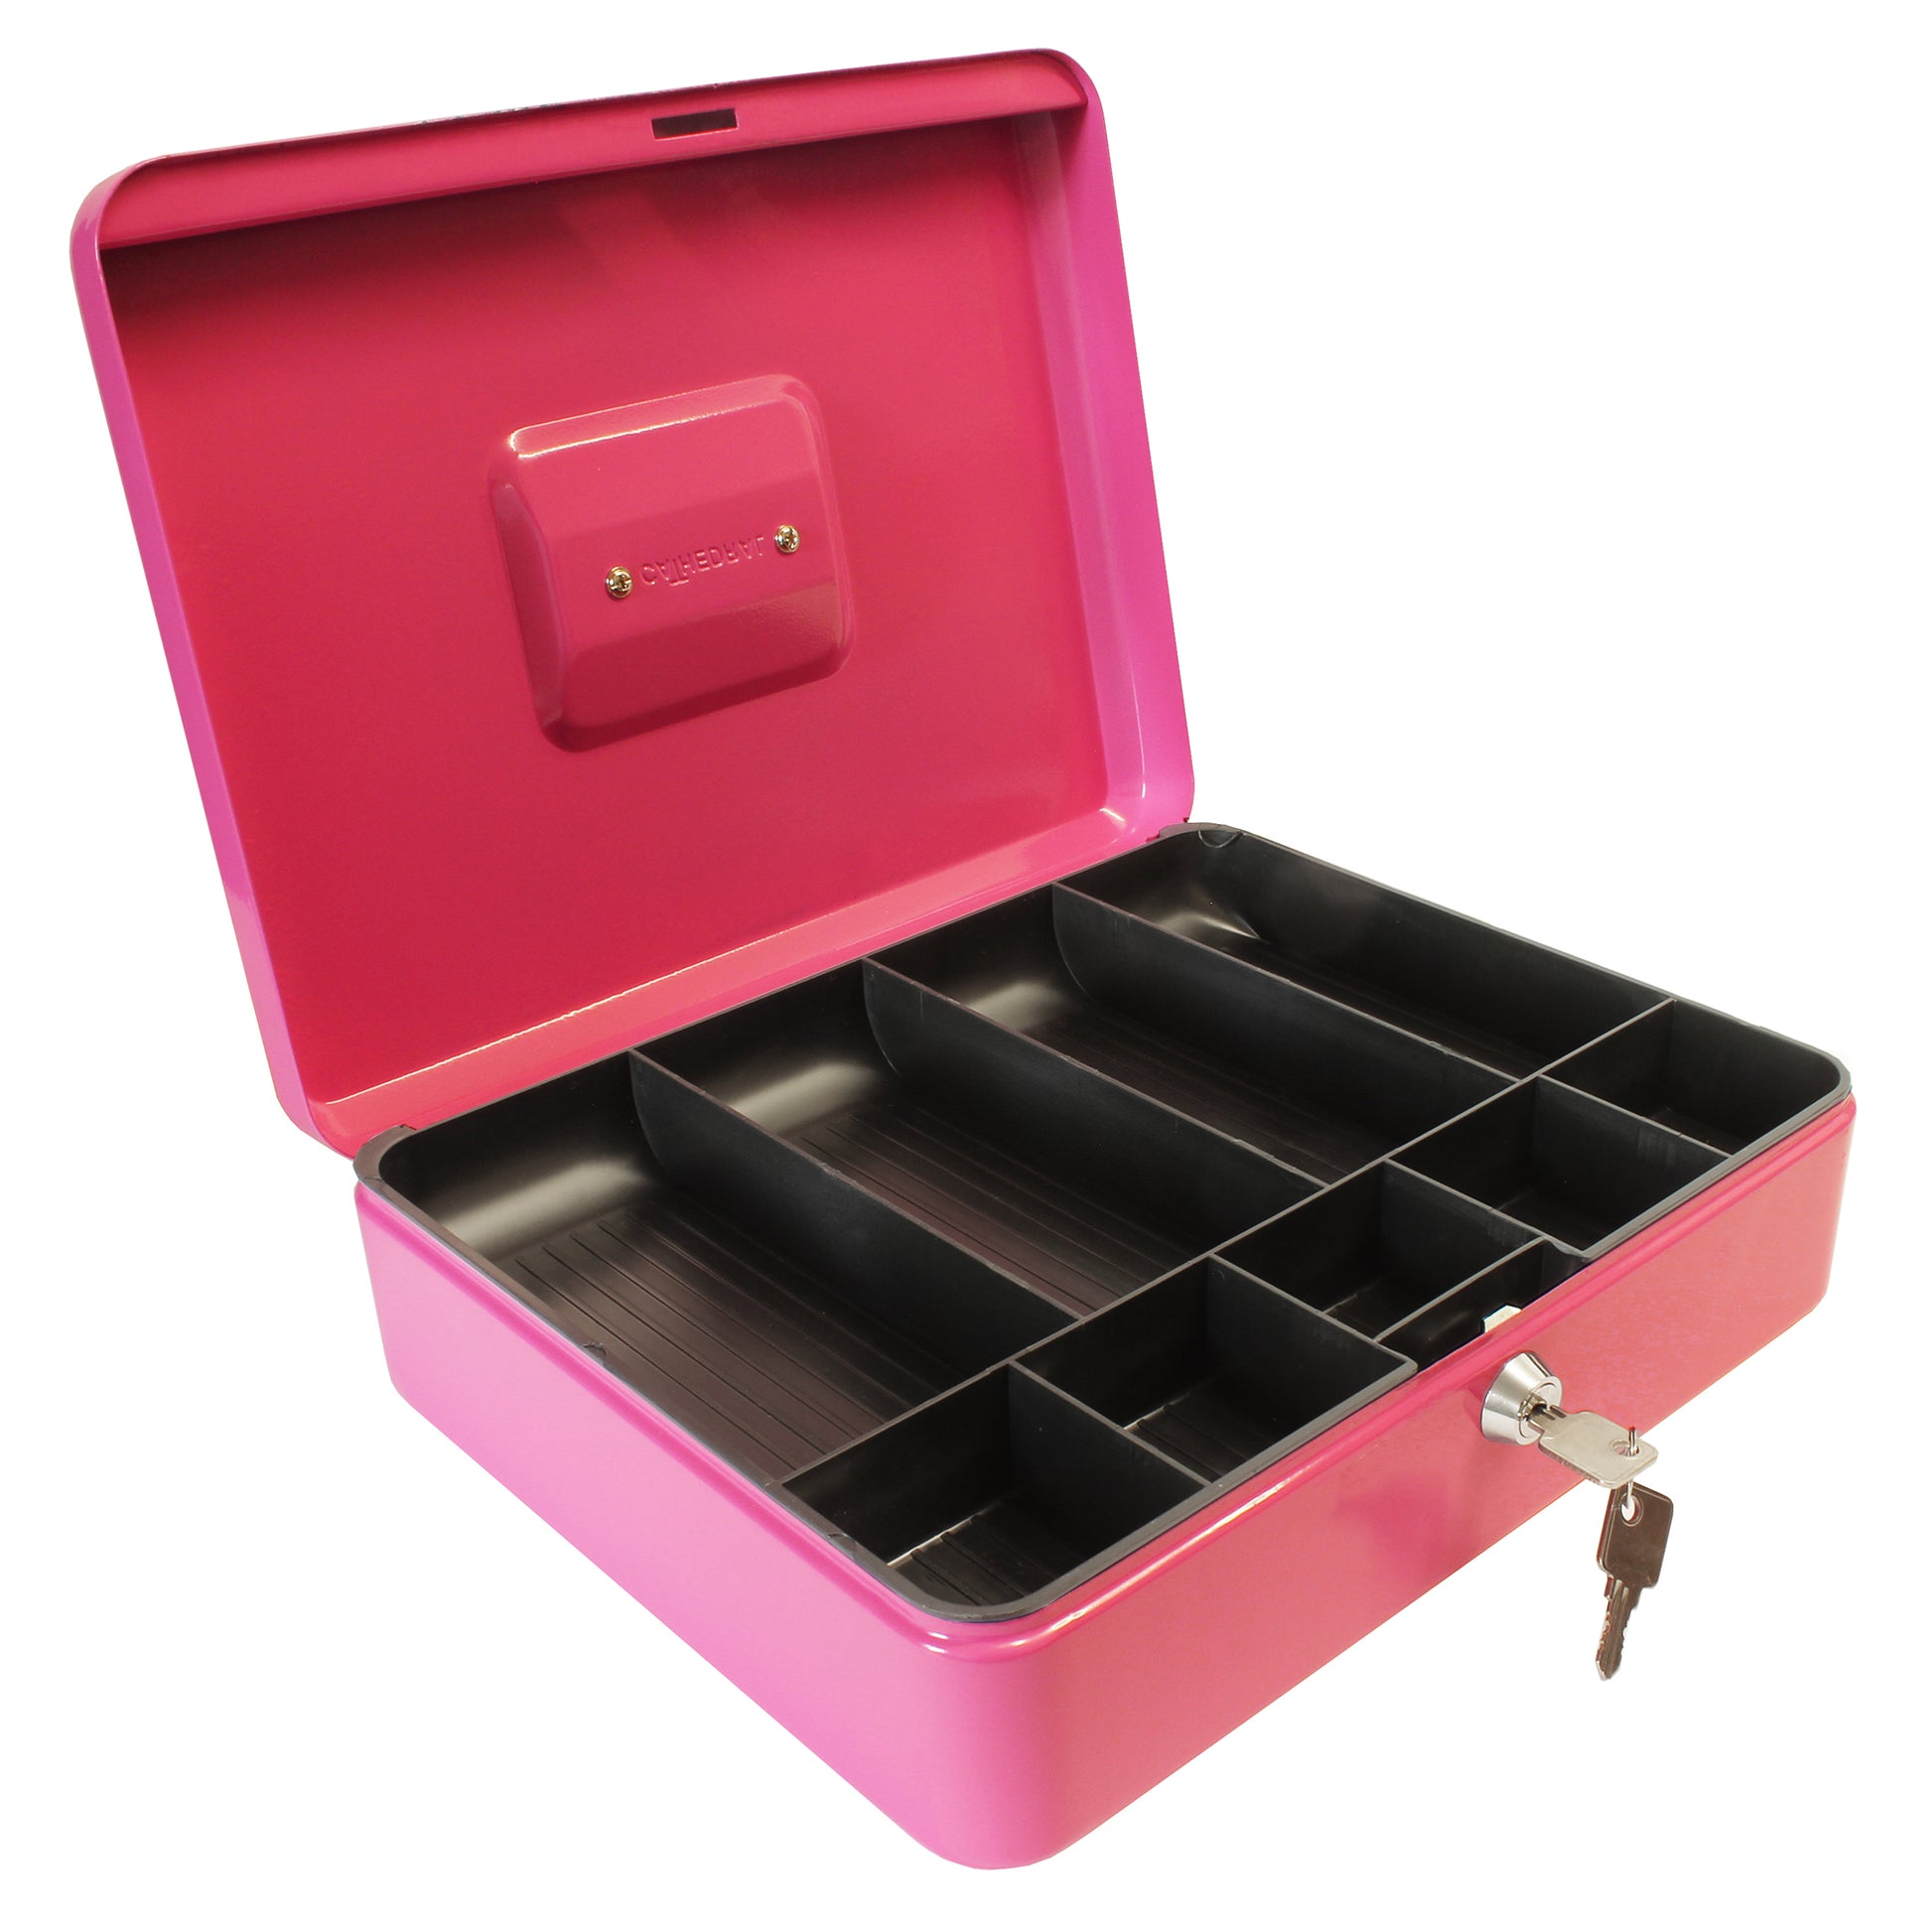 An open 12-inch key lockable gloss pink cash box with a lift-out black 9-compartment tray, designed for organizing and securing coins and cash. A set of 2 keys on a ring is shown inserted into the lock on the front of the cash box.